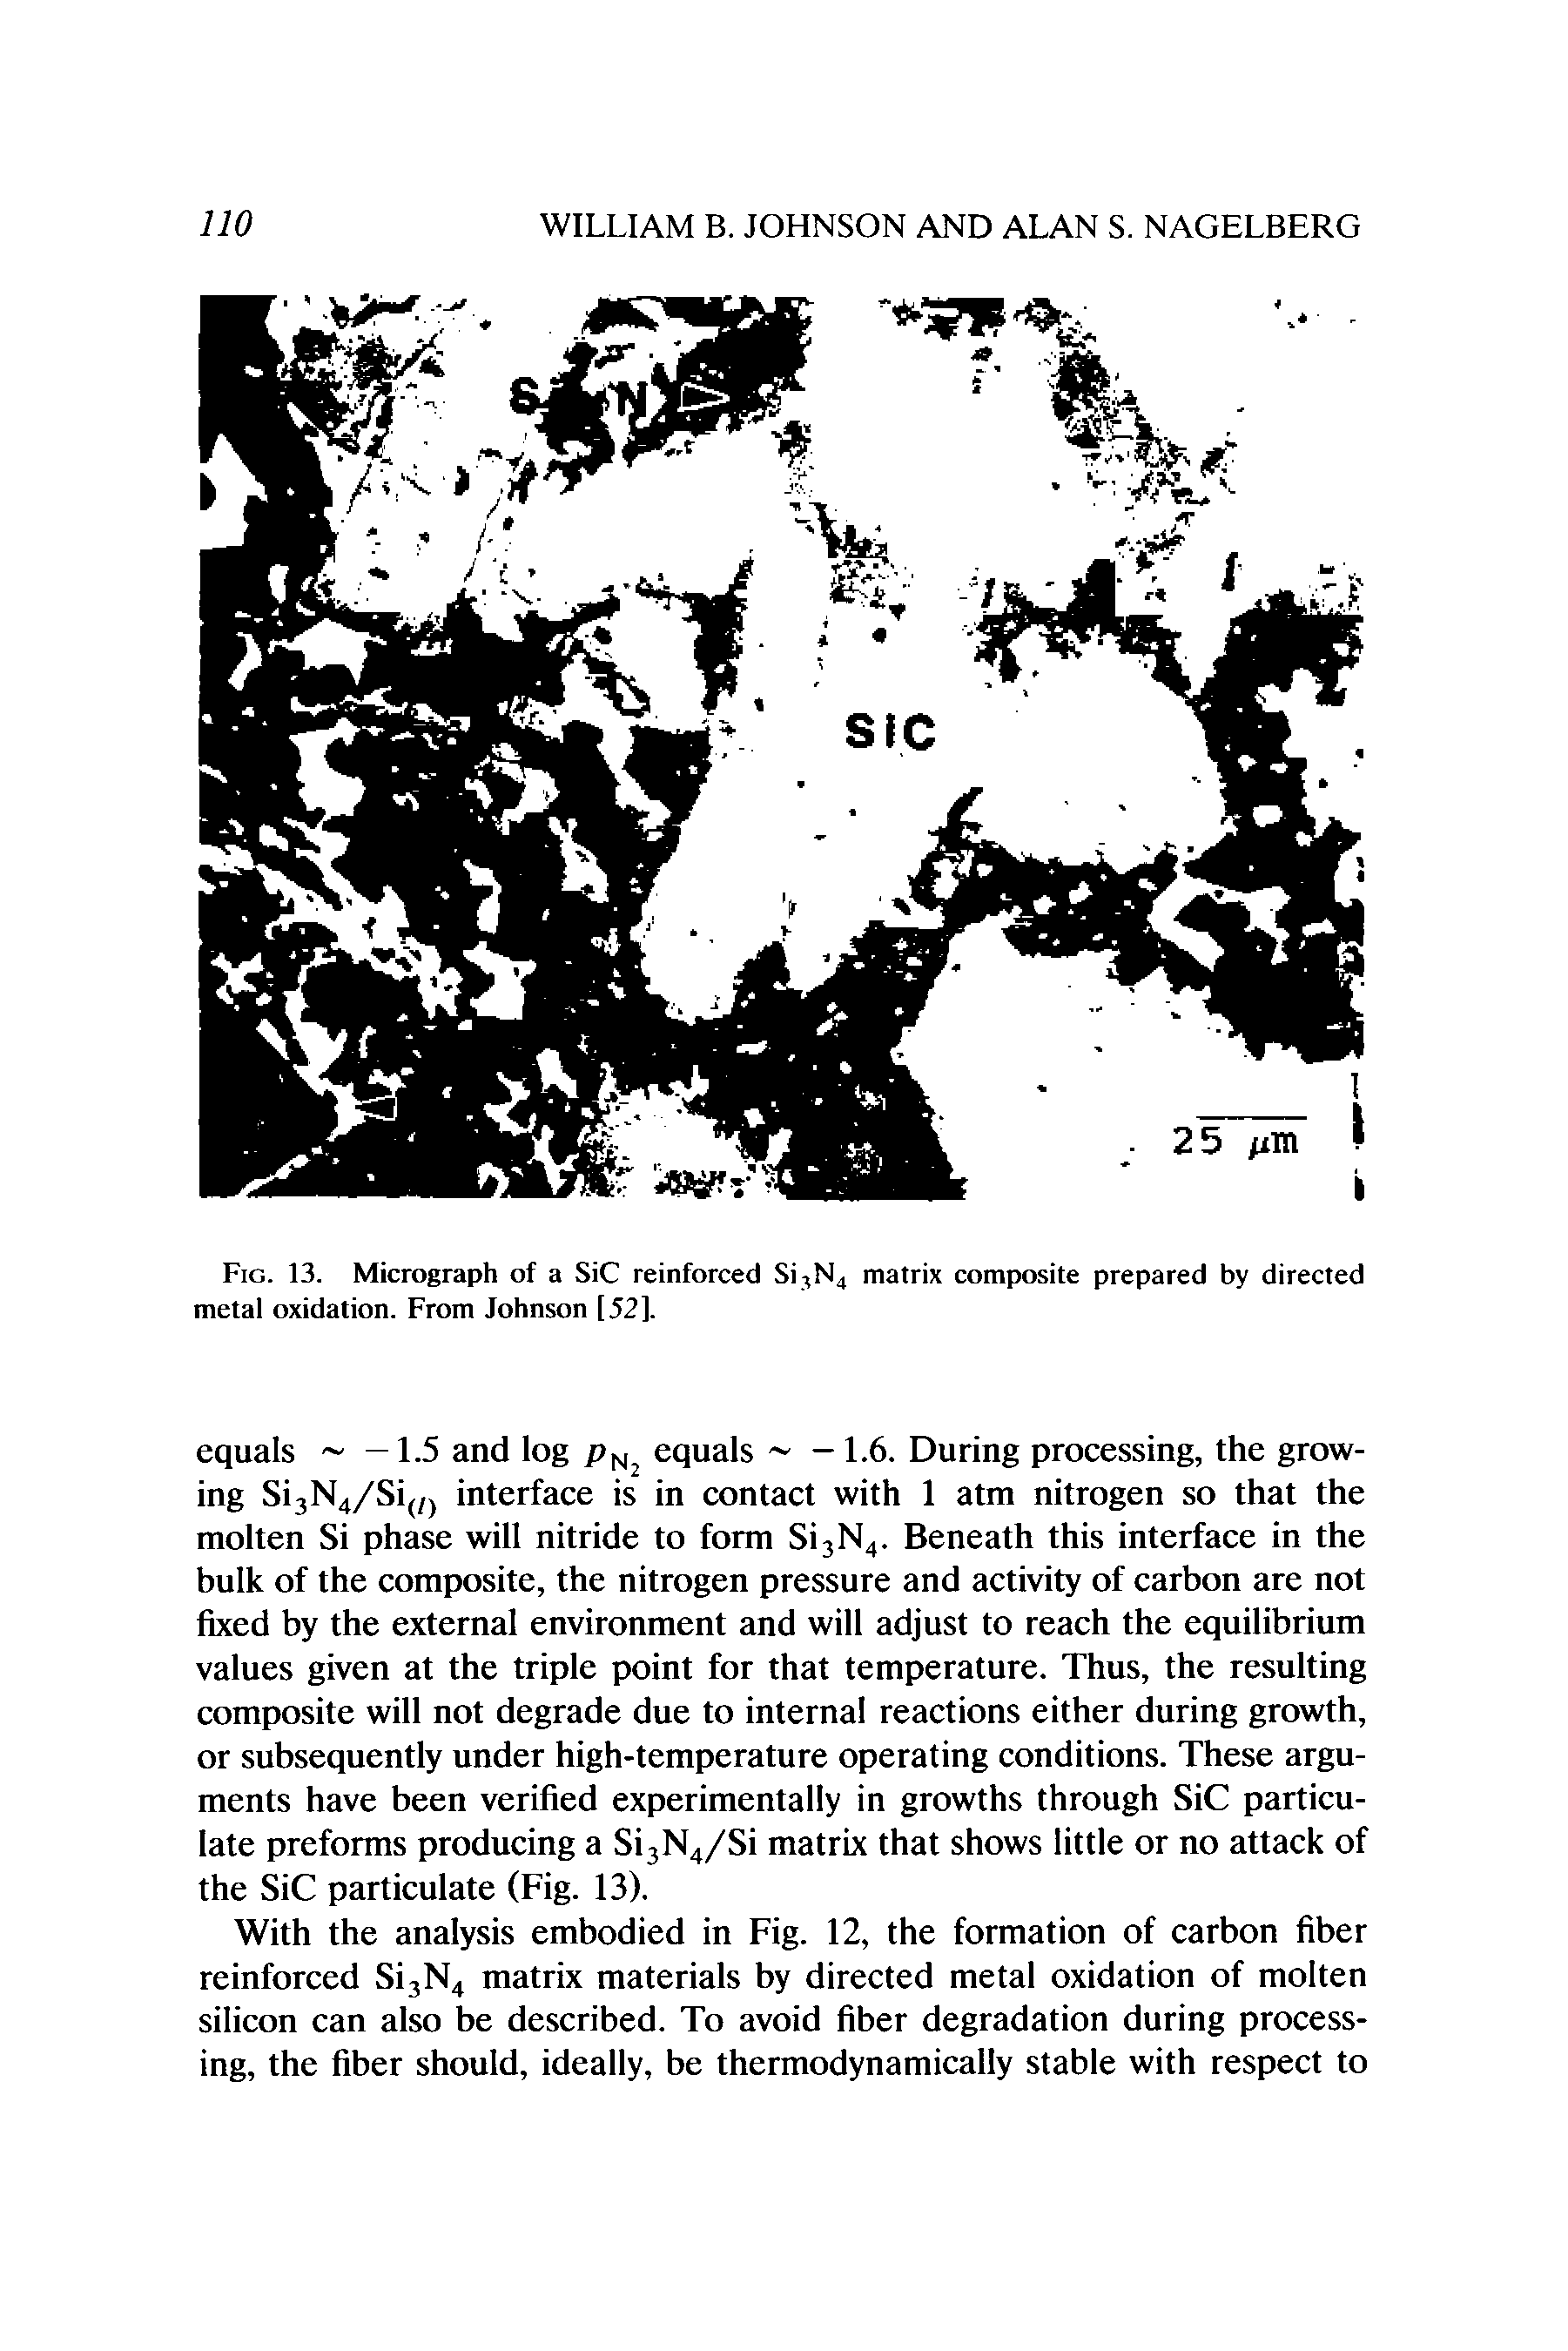 Fig. 13. Micrograph of a SiC reinforced Si, N4 matrix composite prepared by directed metal oxidation. From Johnson [52].